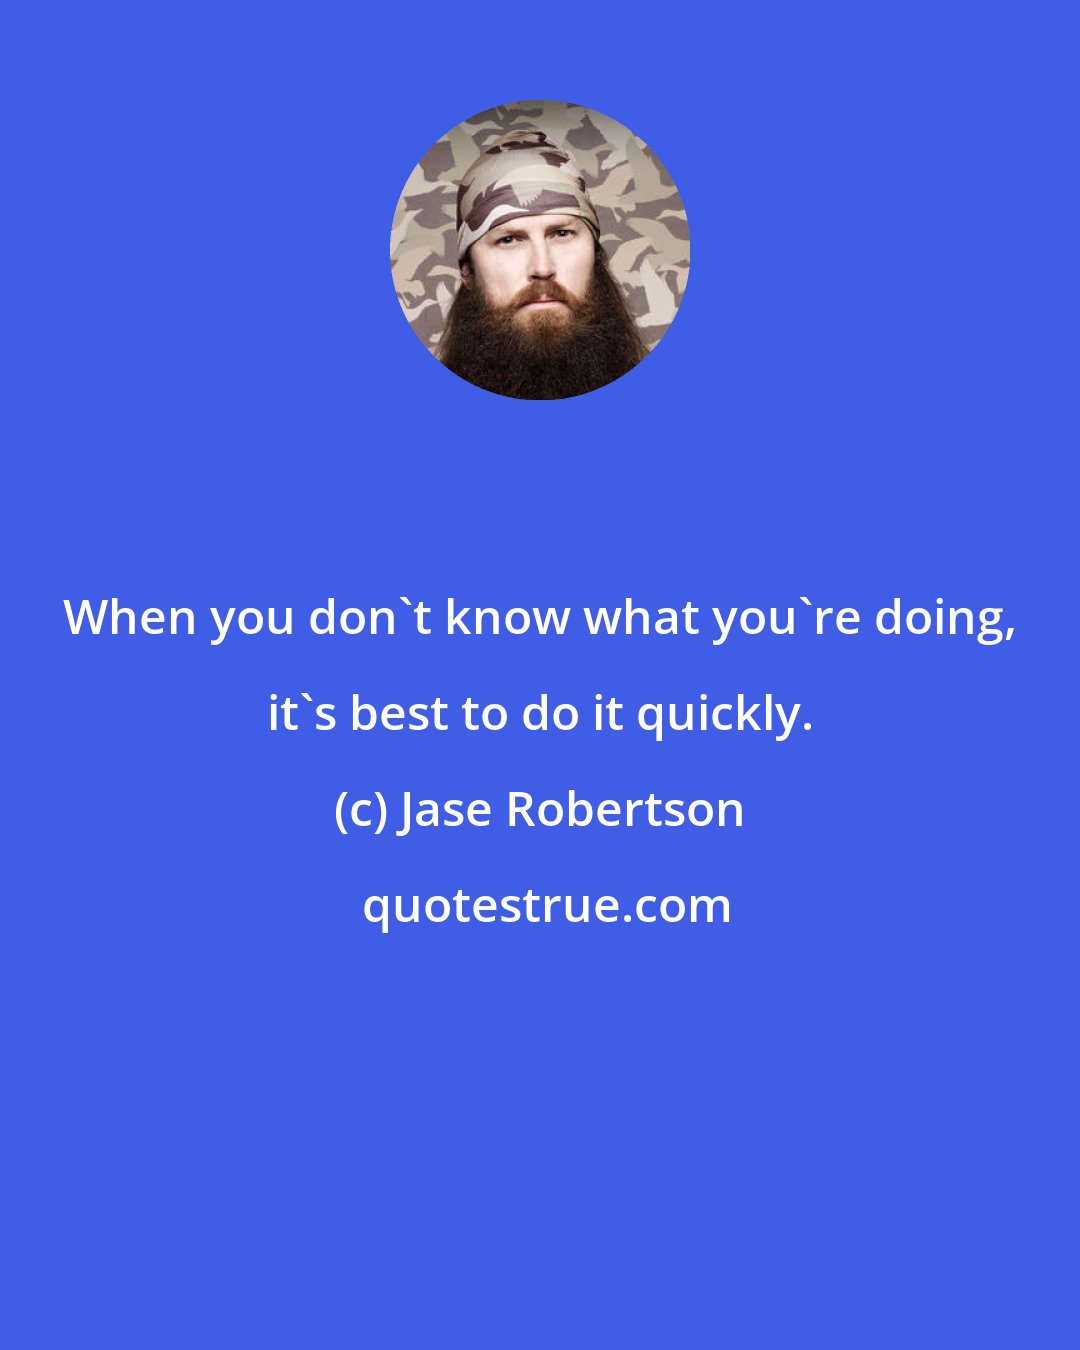 Jase Robertson: When you don't know what you're doing, it's best to do it quickly.